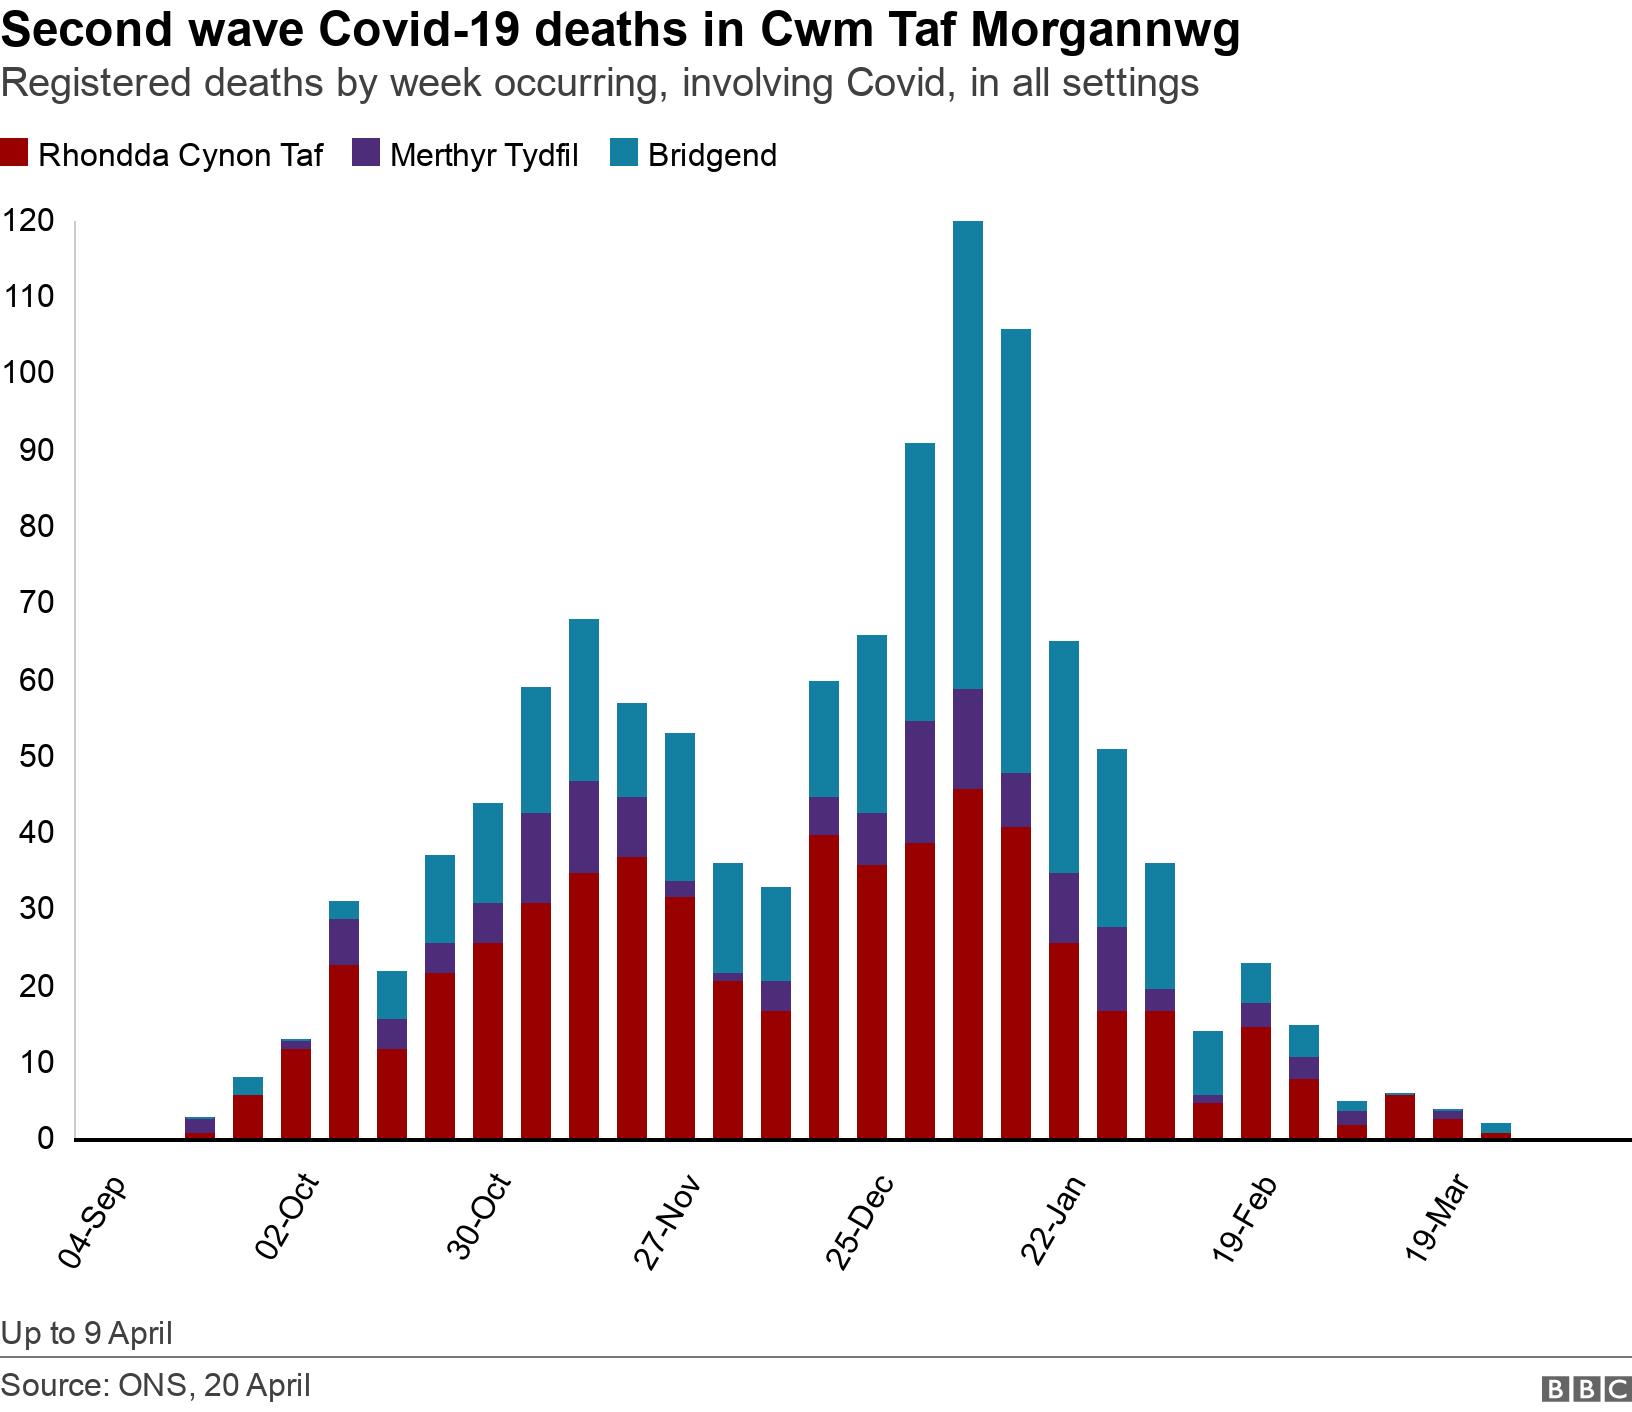 Second wave Covid-19 deaths in Cwm Taf Morgannwg. Registered deaths by week occurring, involving Covid, in all settings.  Up to 9 April.